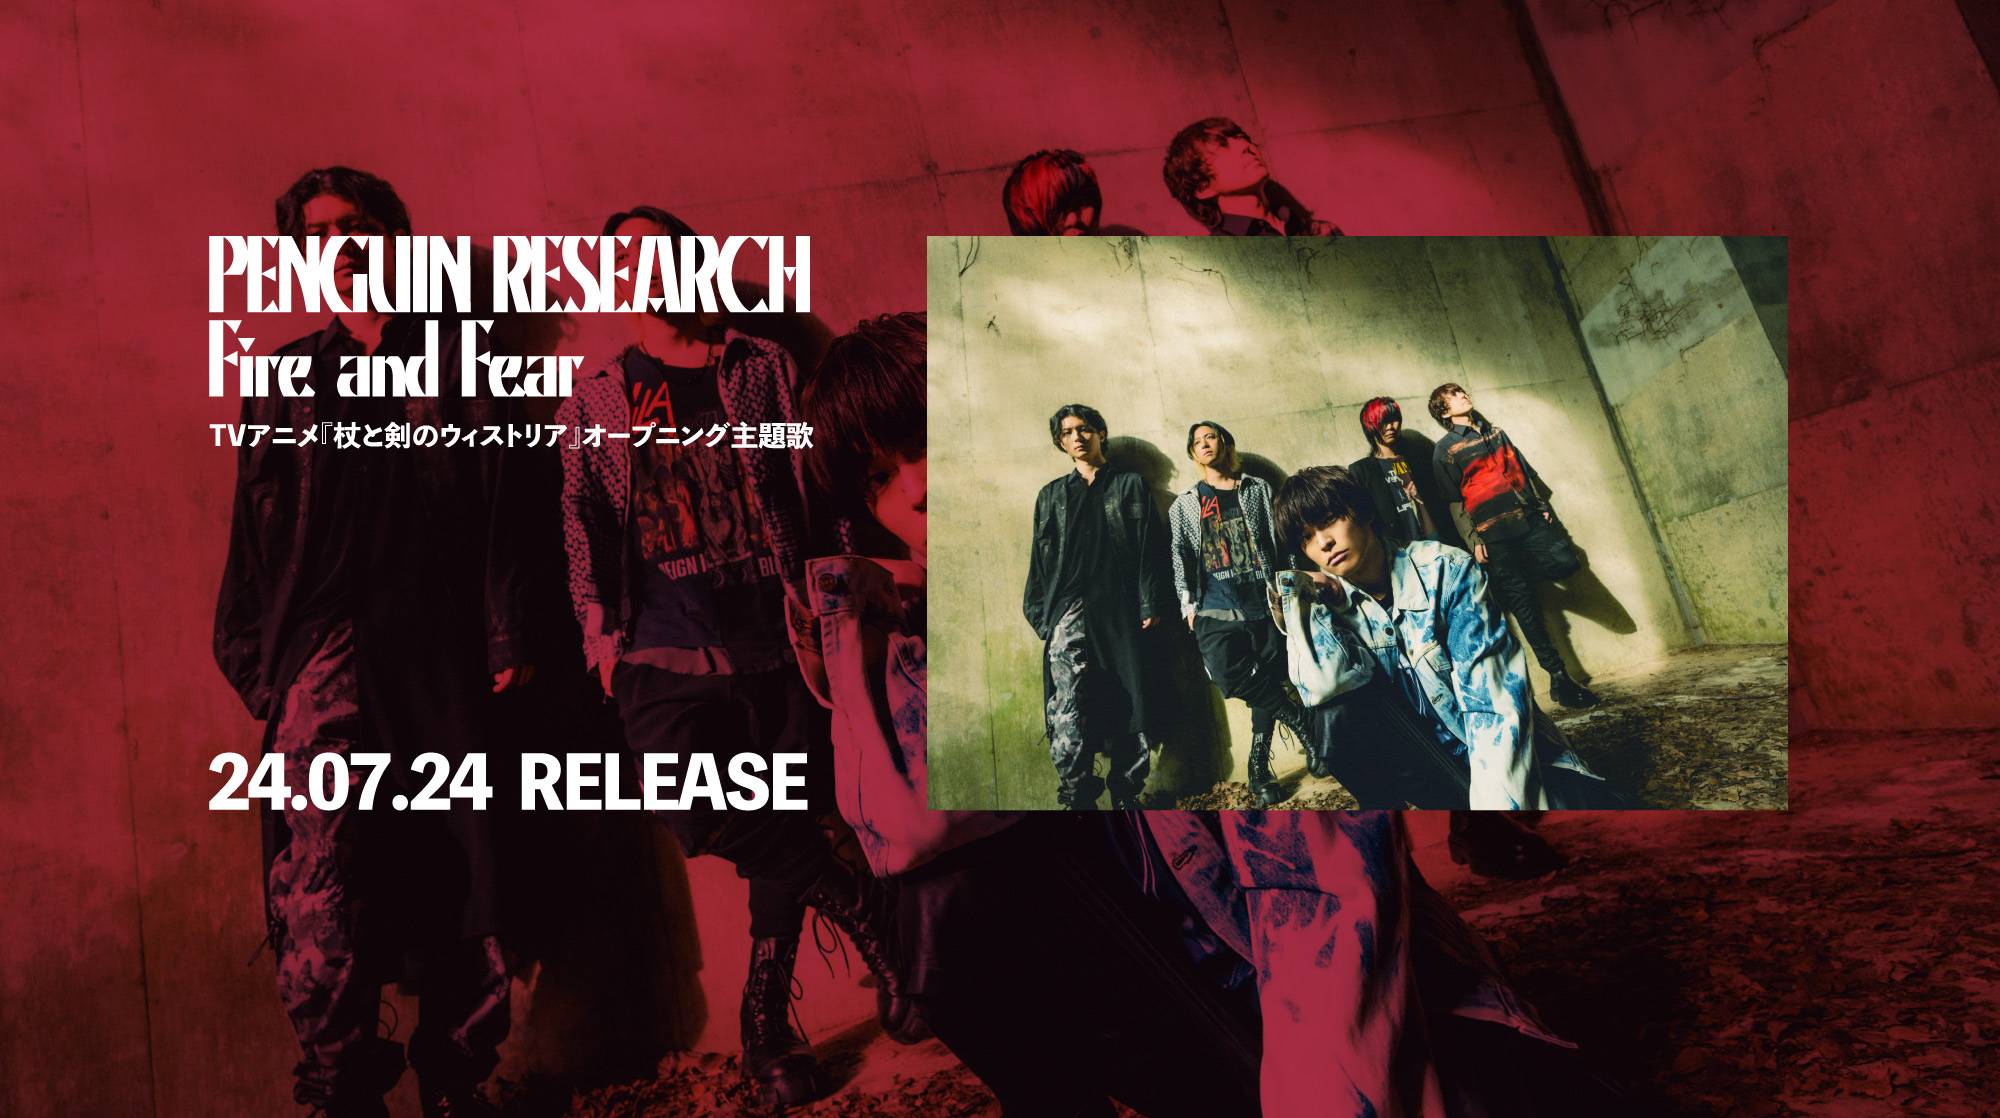 PENGUIN RESEARCH Fire and Fear 24.07.24 Release